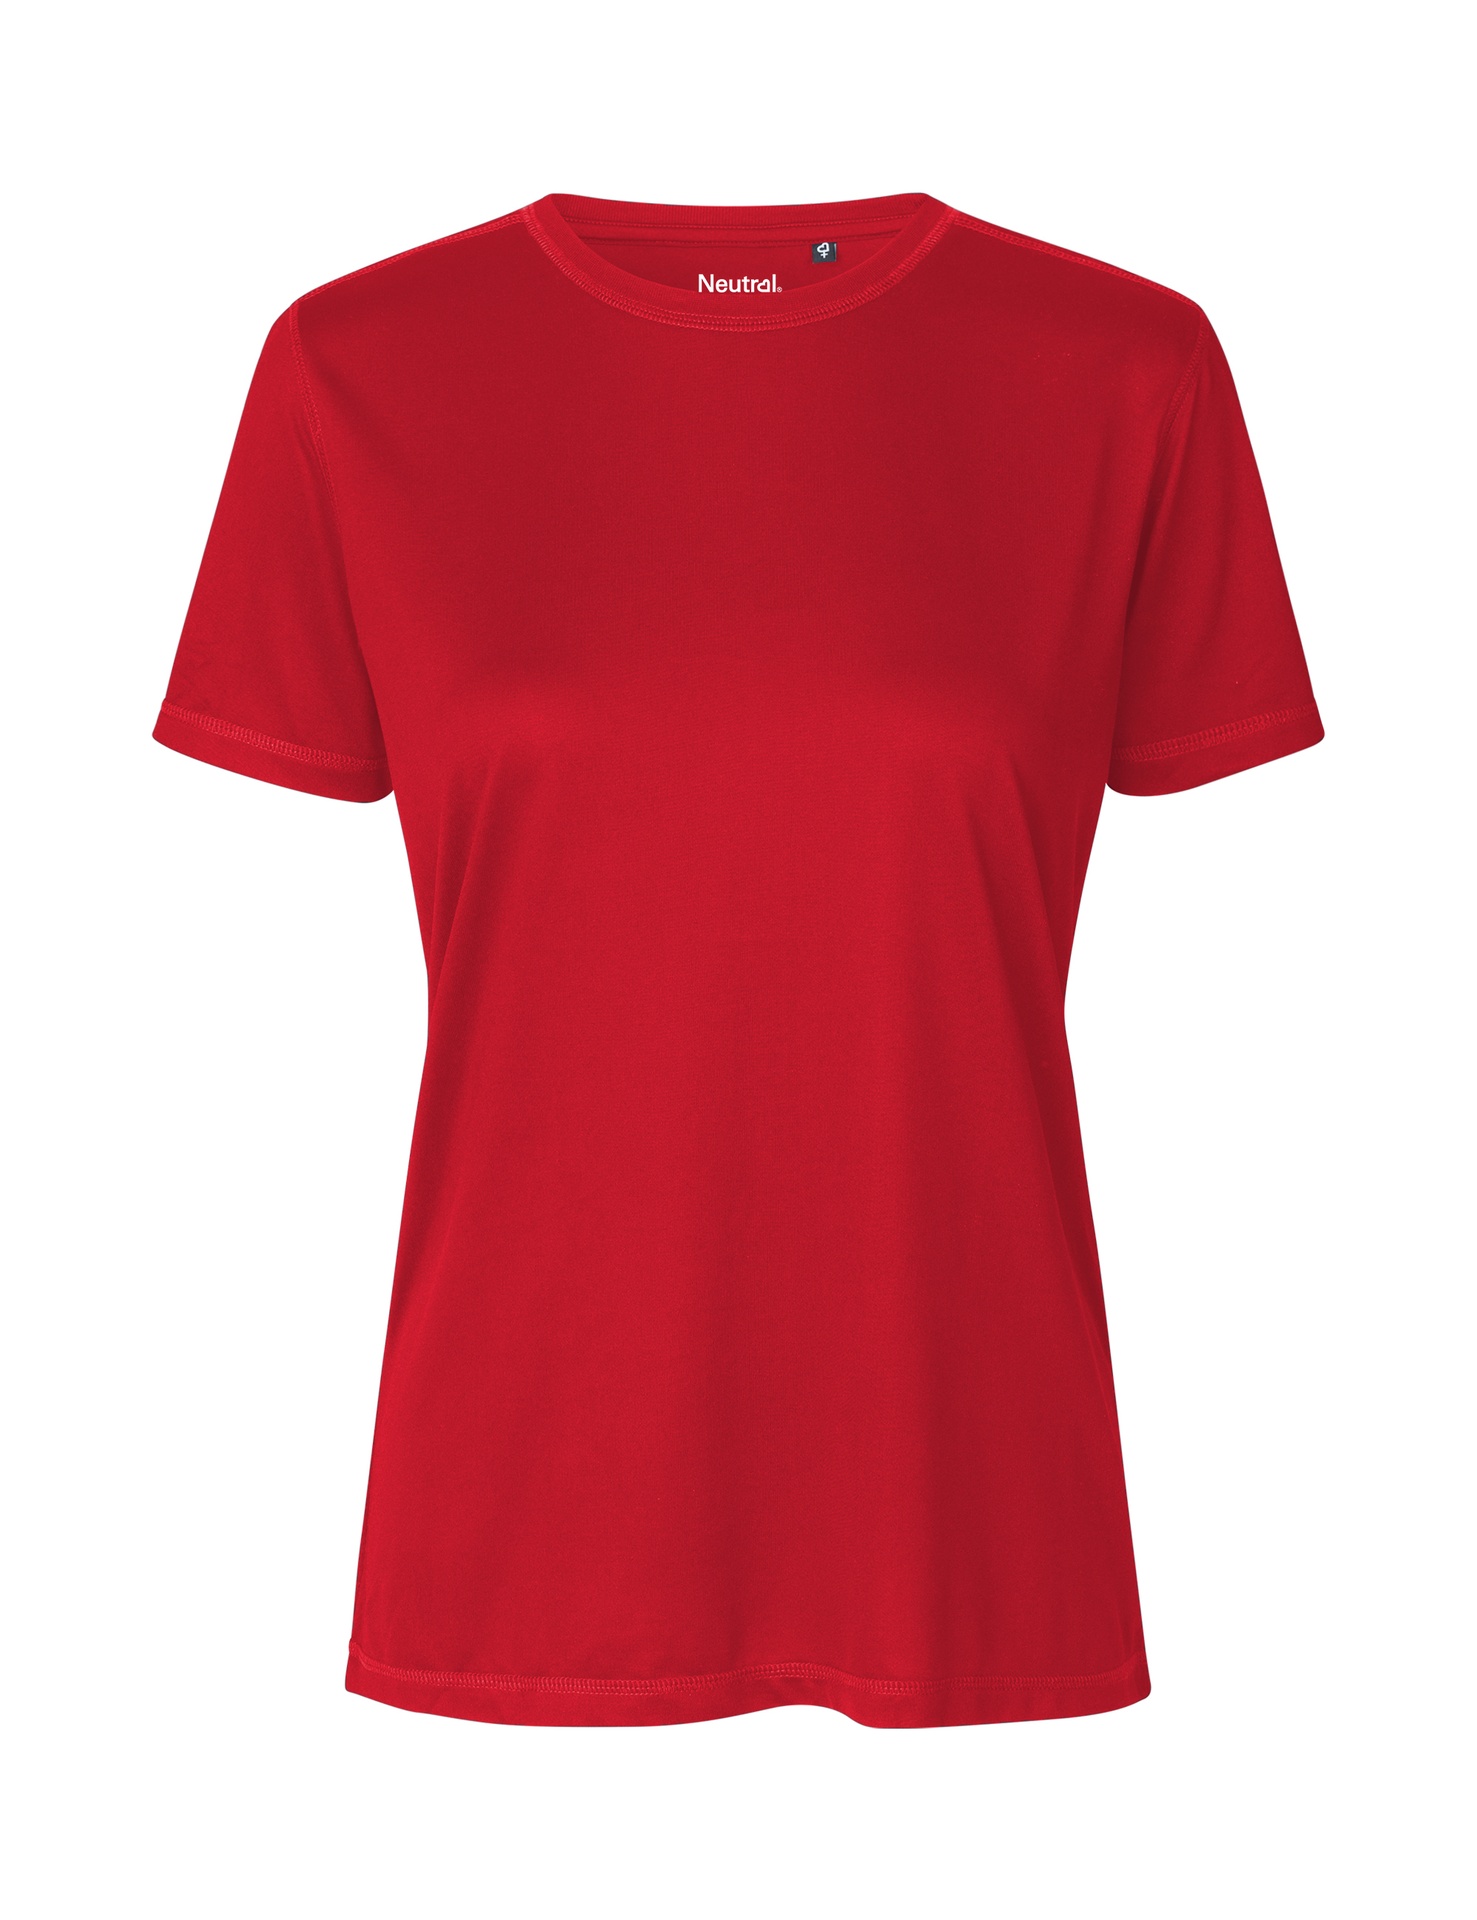 [PR/05215] Ladies Recycled Performance T-Shirt (Red 05, 2XL)